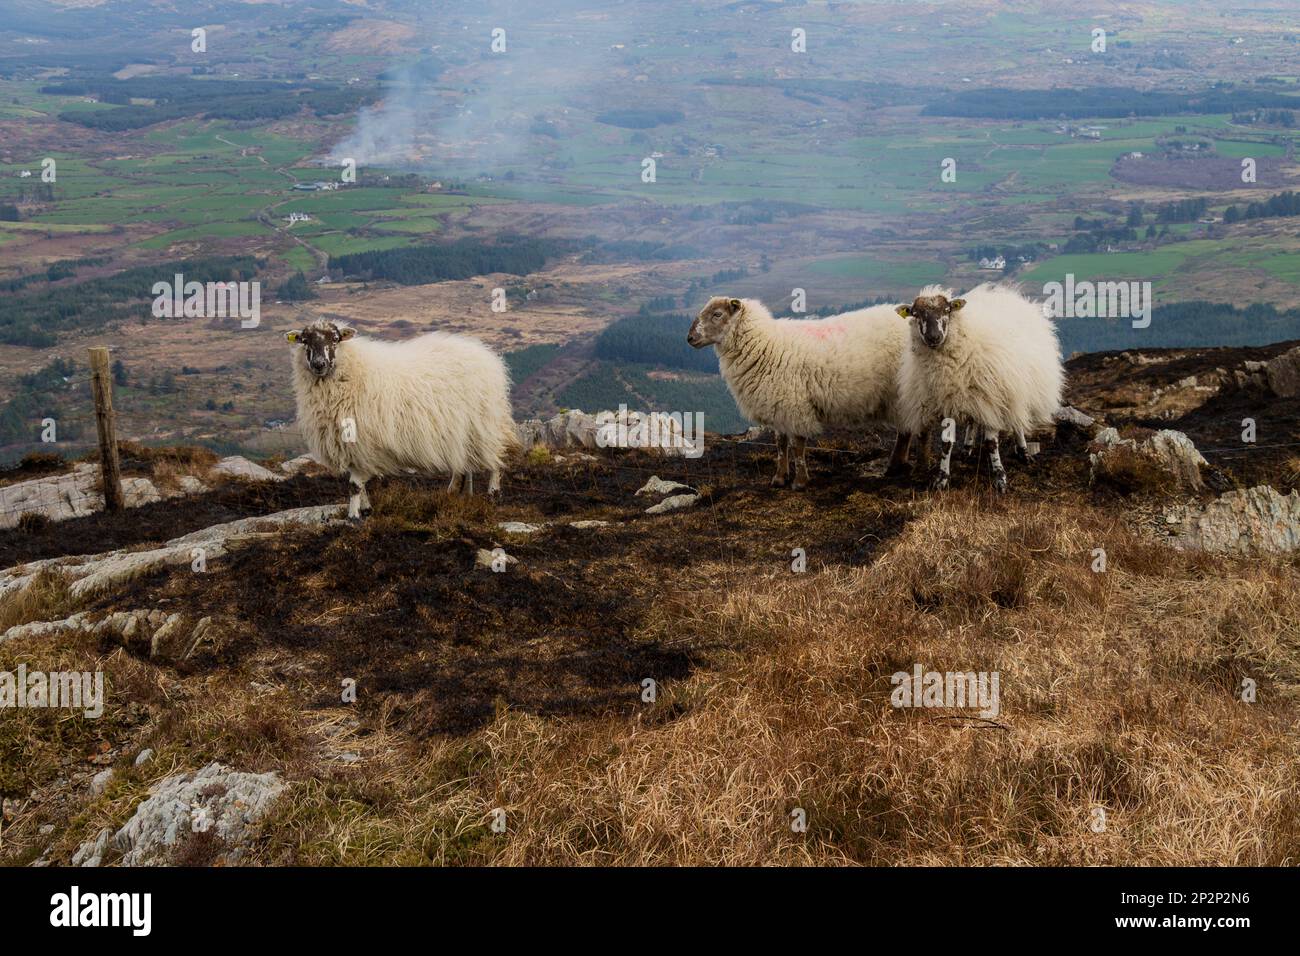 Sheep surrounded by scorched earth on Mount Gabriel after fire burnt vegetation. Stock Photo